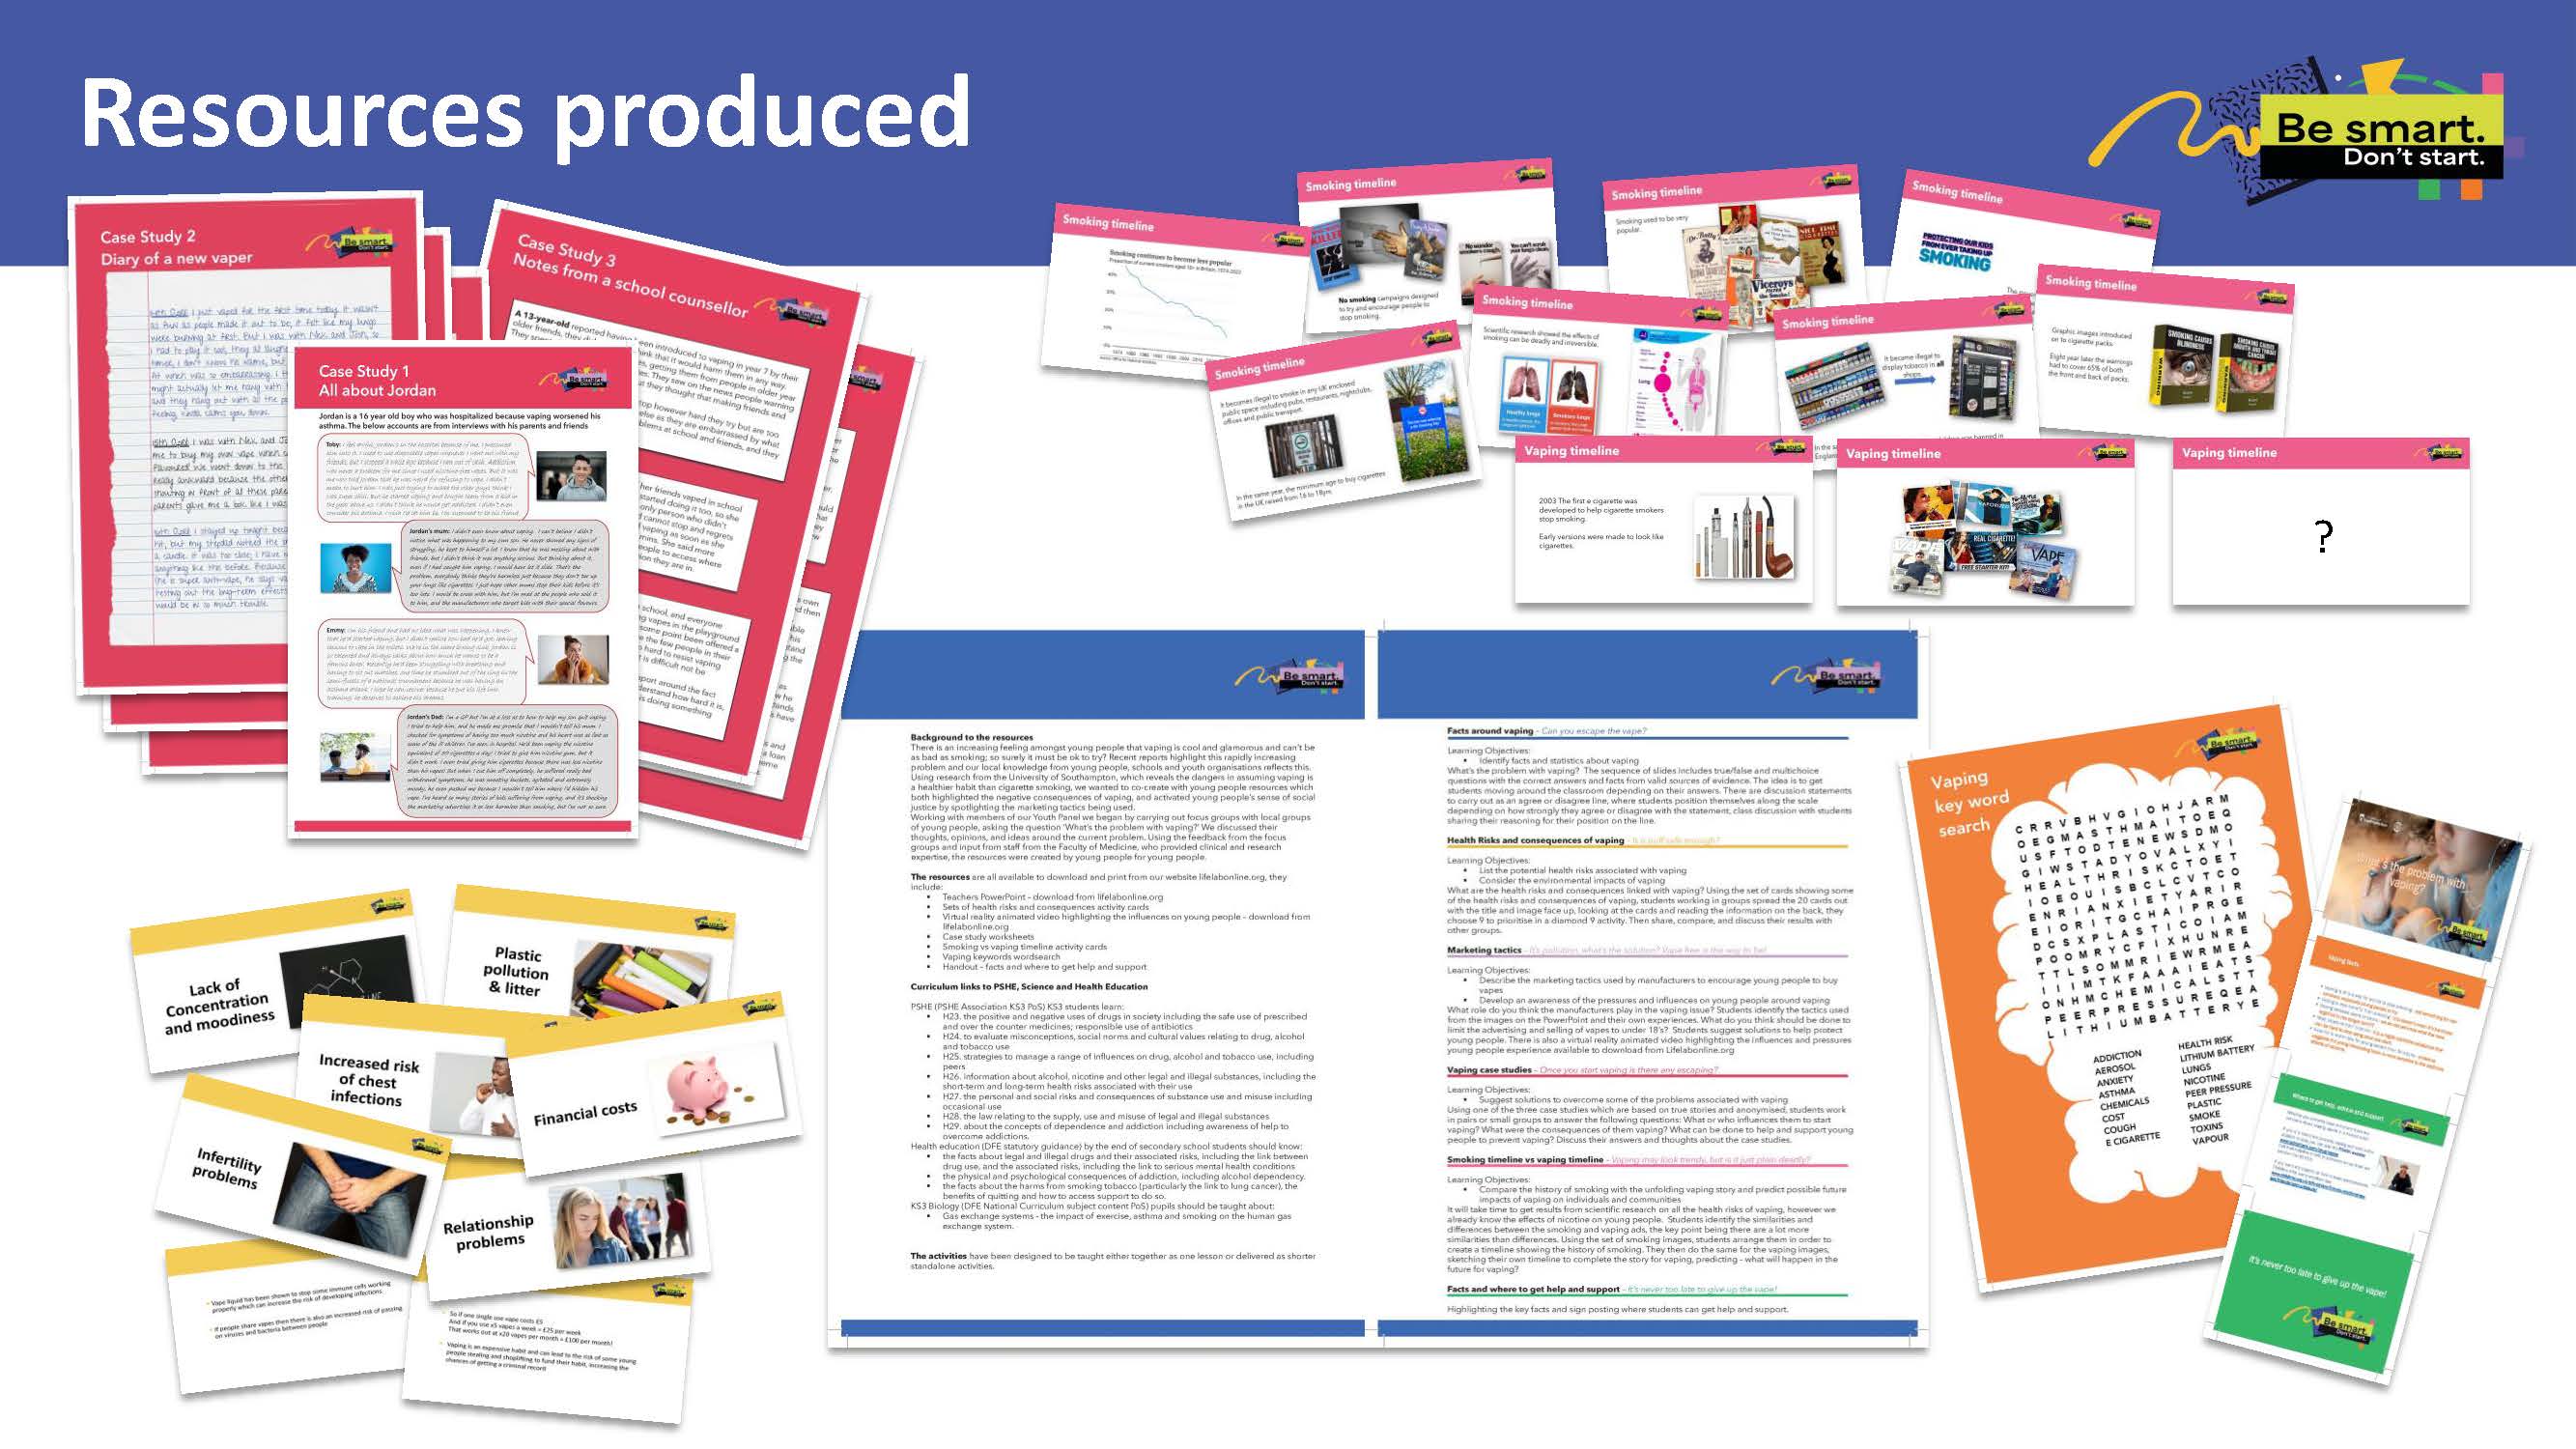 Snap shot of the resources that are available to those who are enrolled.